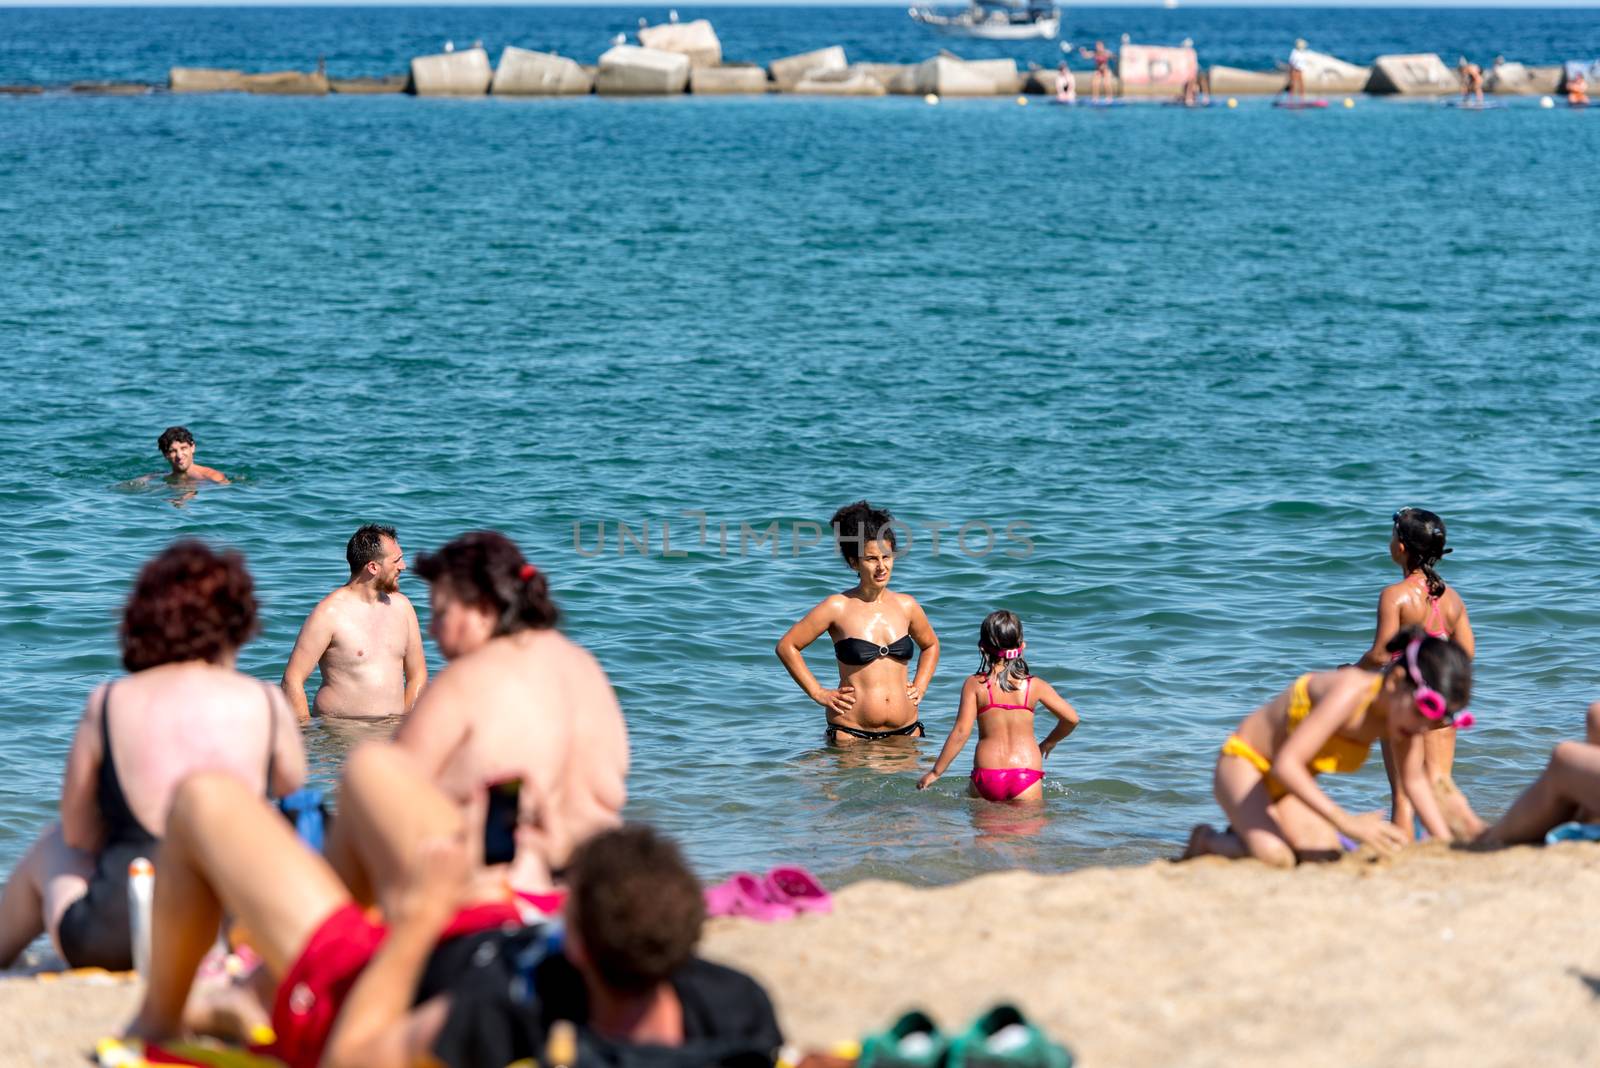 BARCELONA - JUNE 26, 2020: Barceloneta beach with people in summer after COVID 19 on June 26, 2020 in Barcelona, ​​Spain.